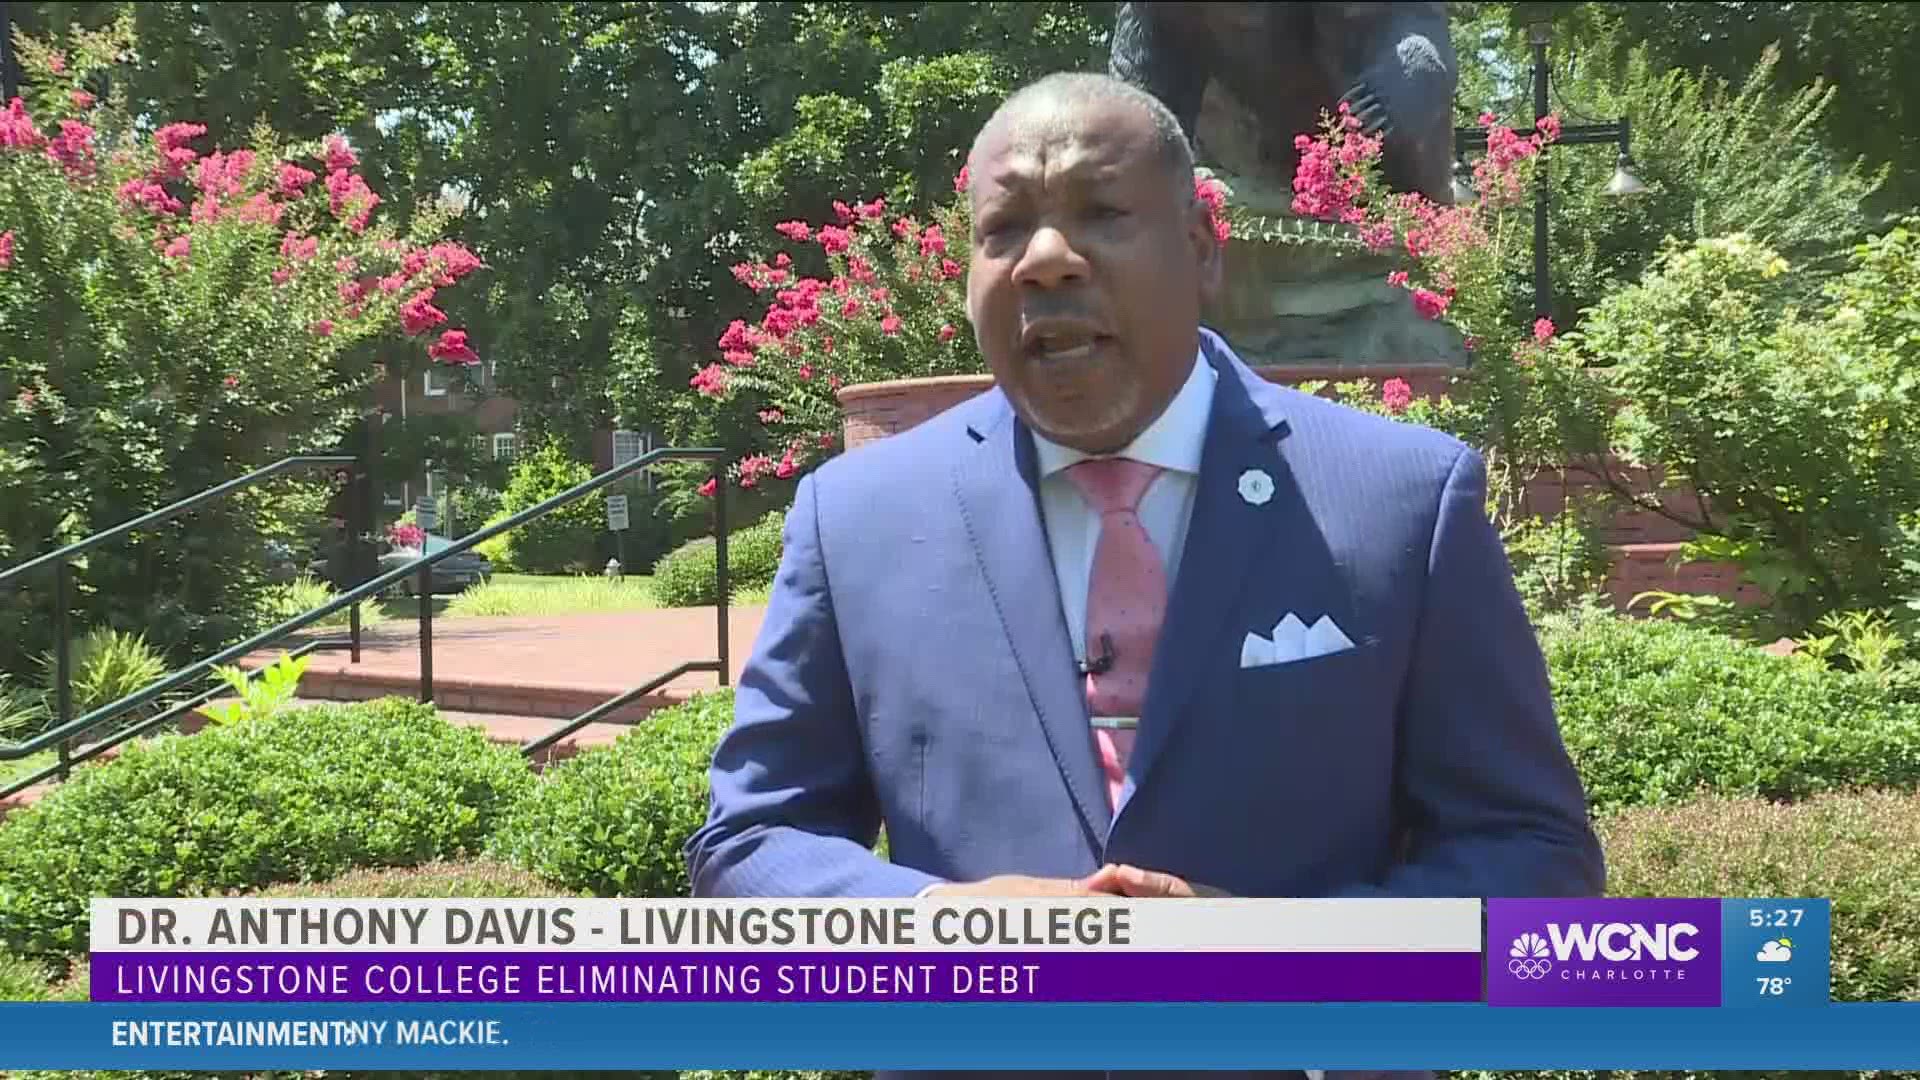 The college announced it would be eliminating $2.8 million worth of student debt.